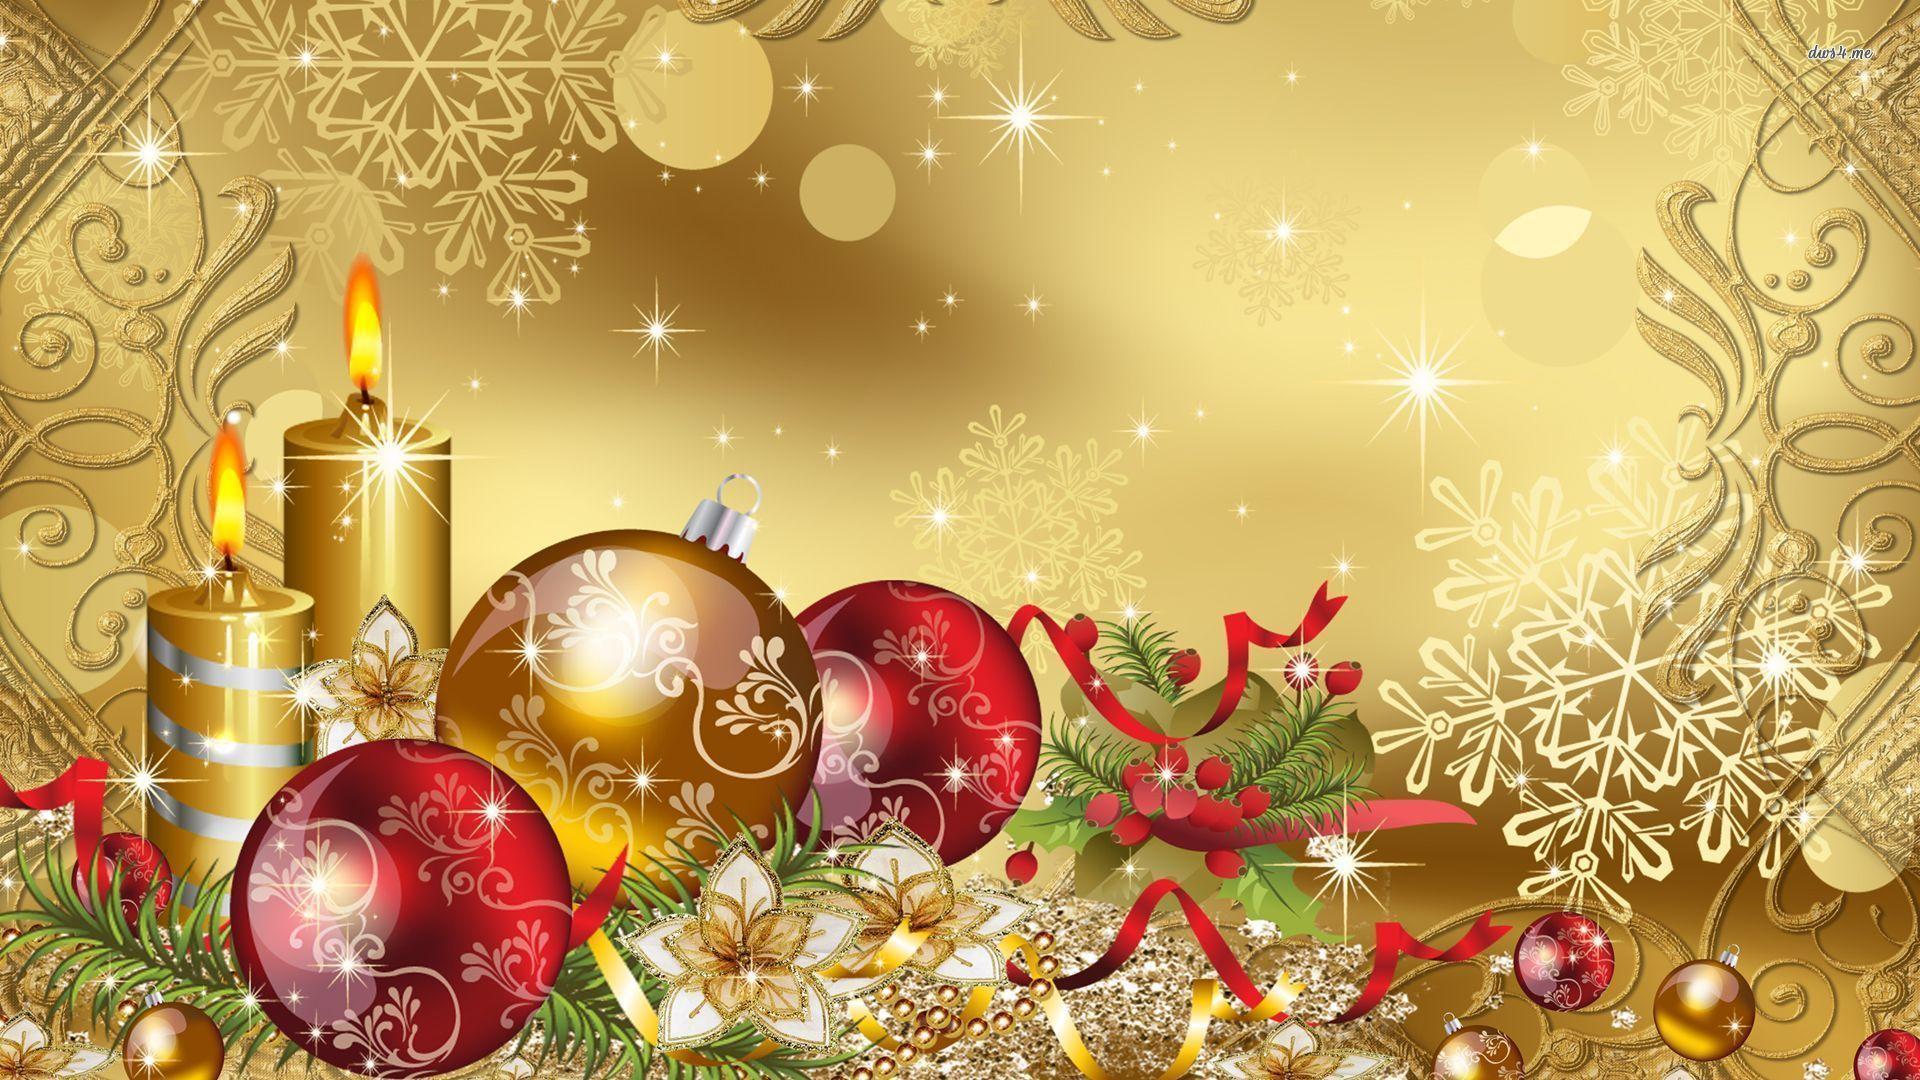 Christmas Ornaments Wallpapers - Wallpaper Cave